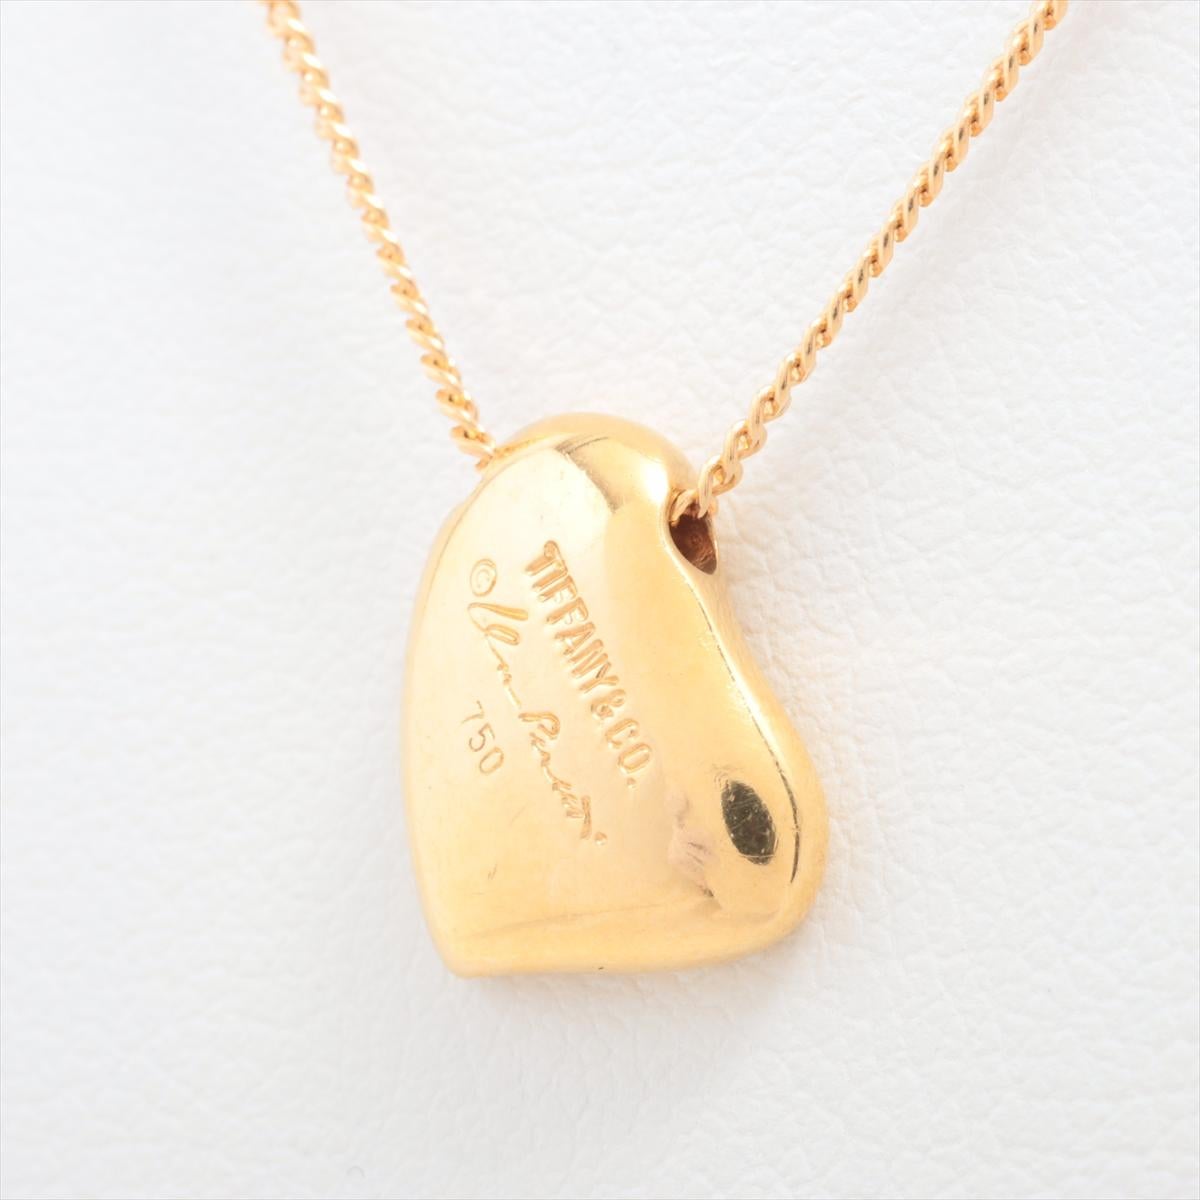 Tiffany & Co. Elsa Peretti Full Heart Pendant Necklace Gold In Good Condition For Sale In Indianapolis, IN